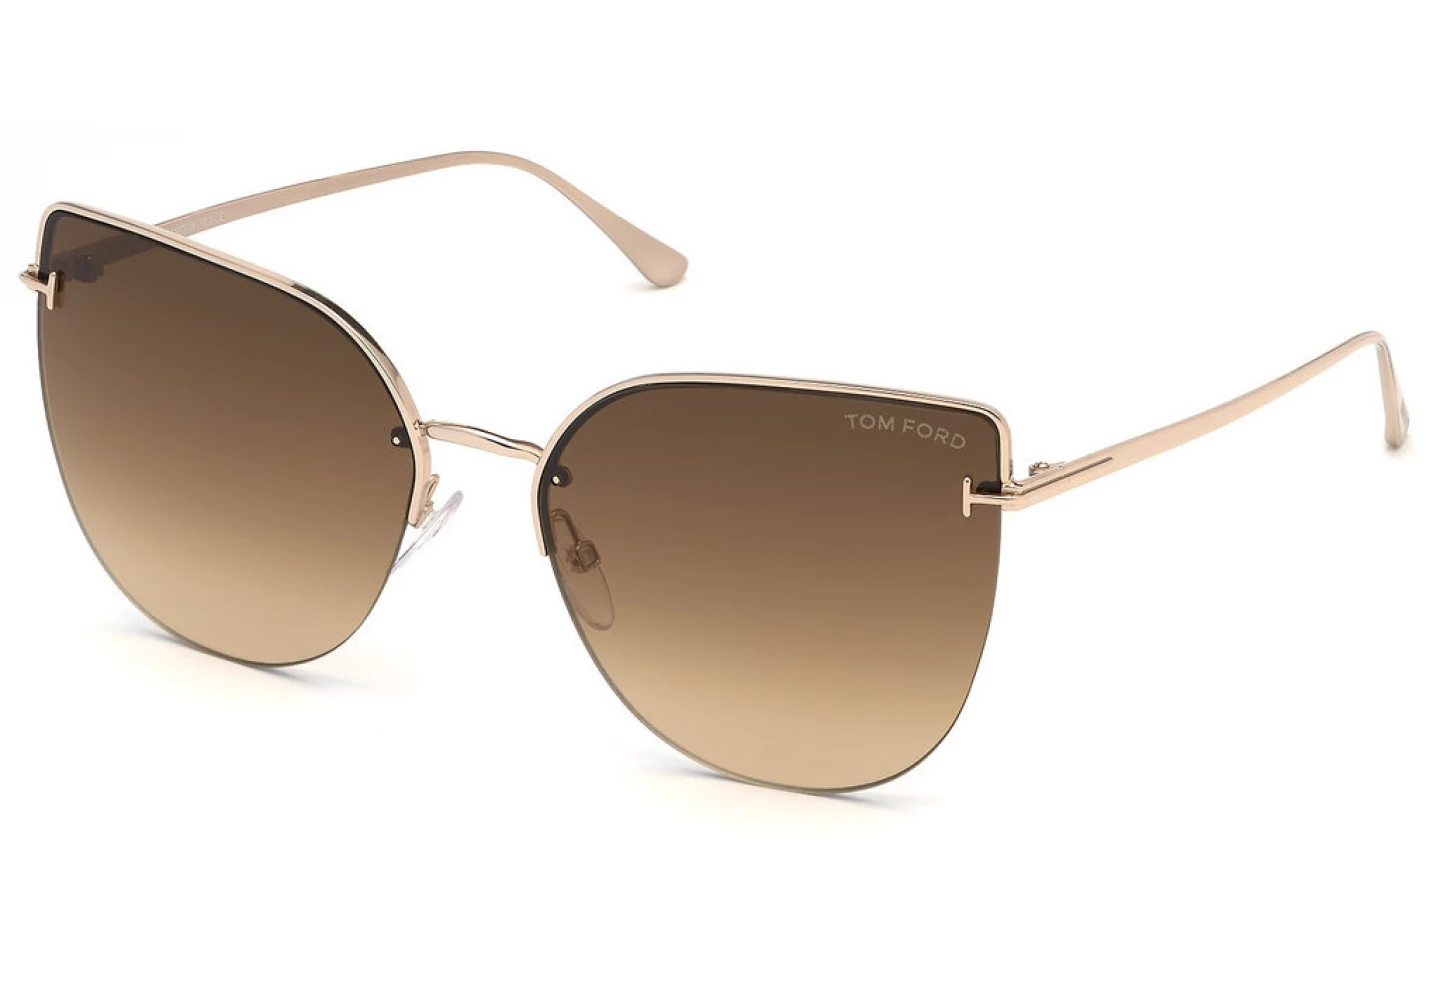 Sunglasses Tom Ford FT0652 28F | DUOS